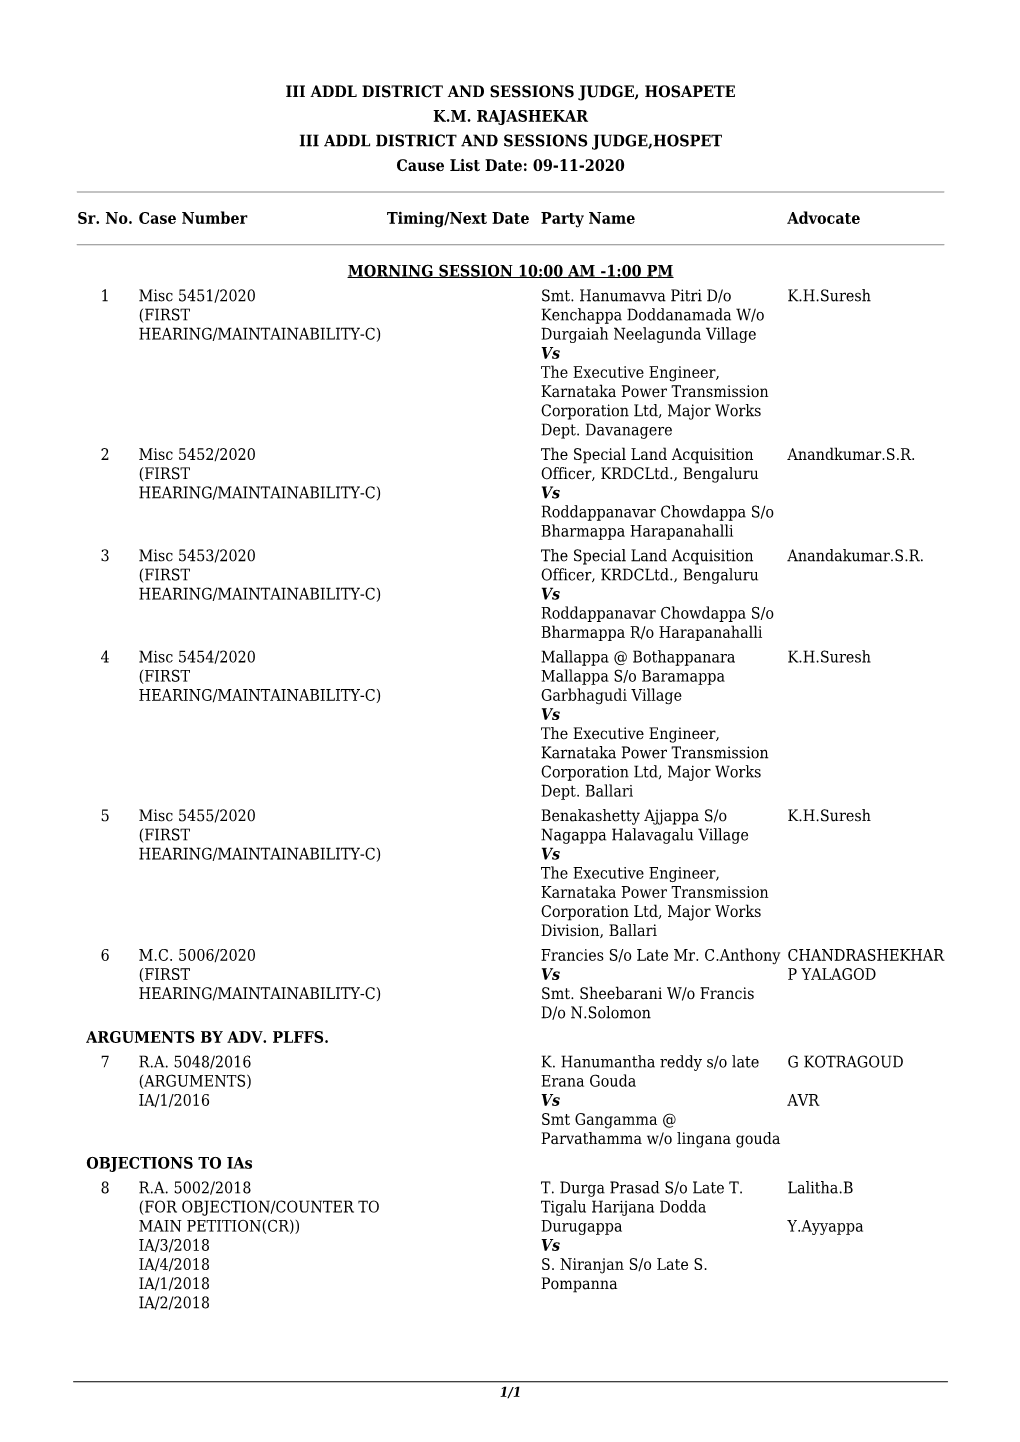 III ADDL DISTRICT and SESSIONS JUDGE, HOSAPETE K.M. RAJASHEKAR III ADDL DISTRICT and SESSIONS JUDGE,HOSPET Cause List Date: 09-11-2020